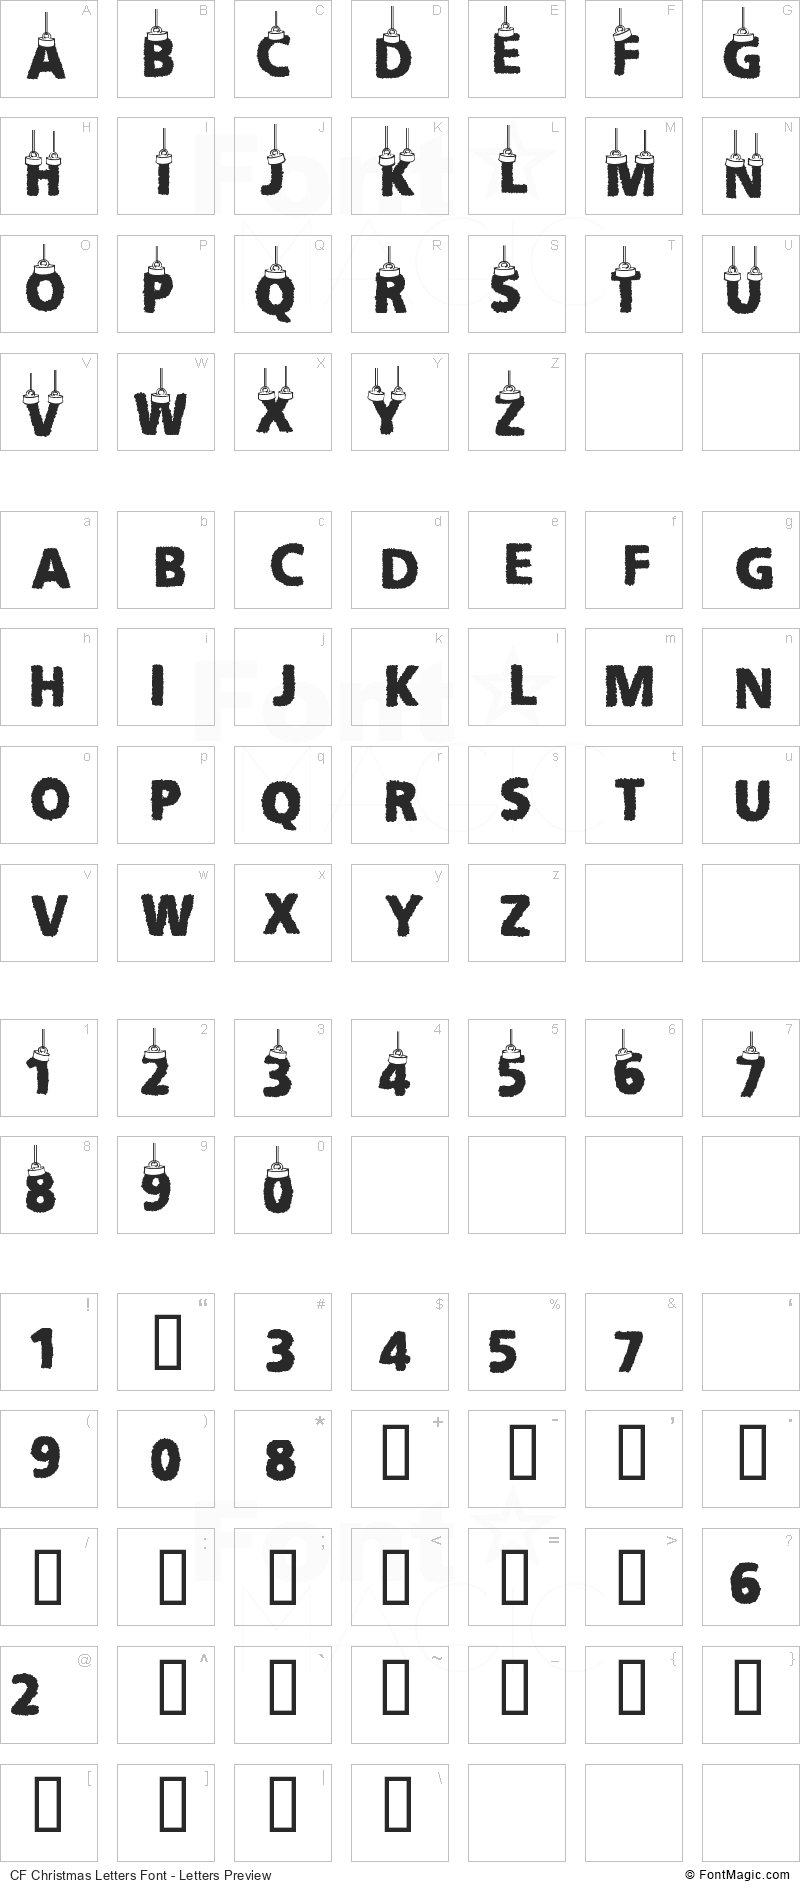 CF Christmas Letters Font - All Latters Preview Chart